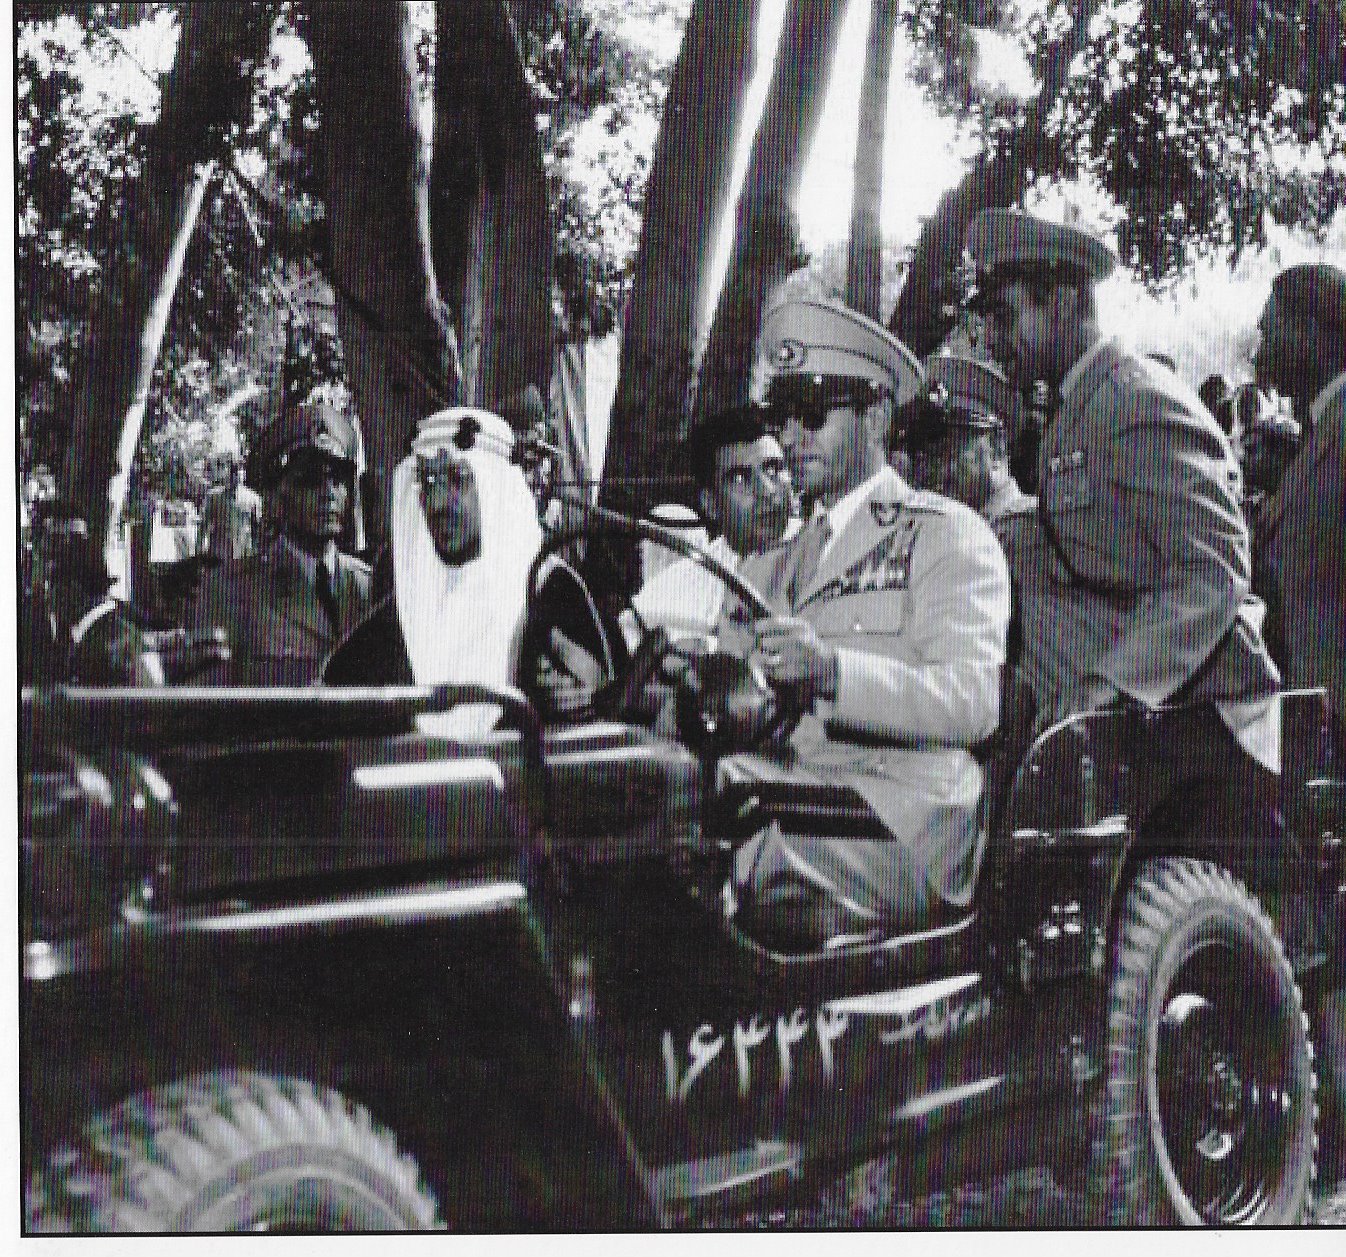 King Saud on an official visit to Iran., And the picture shows the car passengers, led by the Shah of Iran, Mohammad Reza Blhoa himself and saluting the crowd that attended to him. Tehran on 23 de December 1364 e - / 1955.